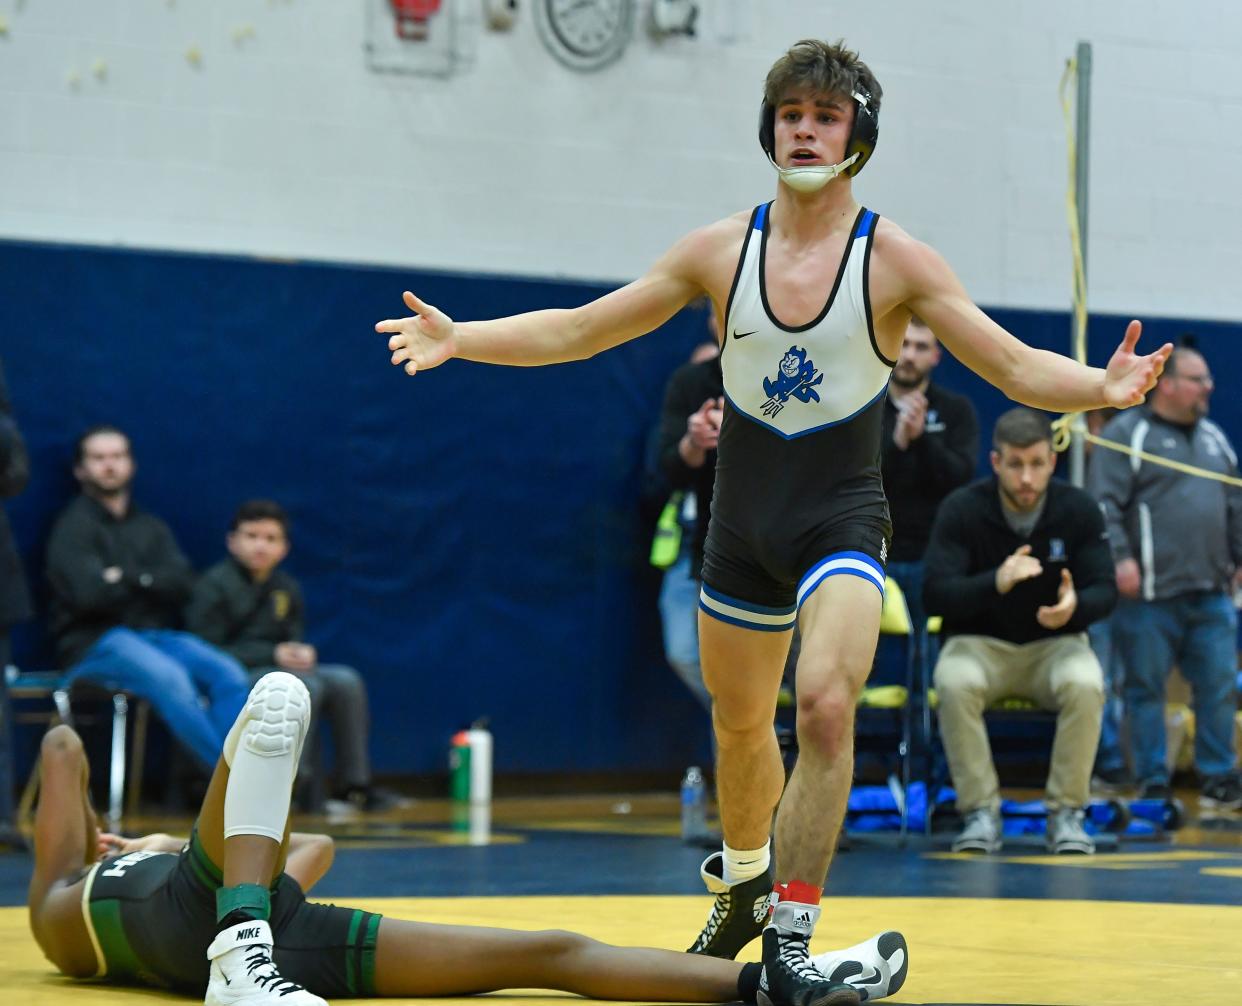 Brockport's Dino Battisti, right, reacts after beating Rush-Henrietta's Fletcher Smith in the final of the 145-pound weight class during the Teike-Bernabi Wrestling Tournament, Friday, Dec. 29, 2023.